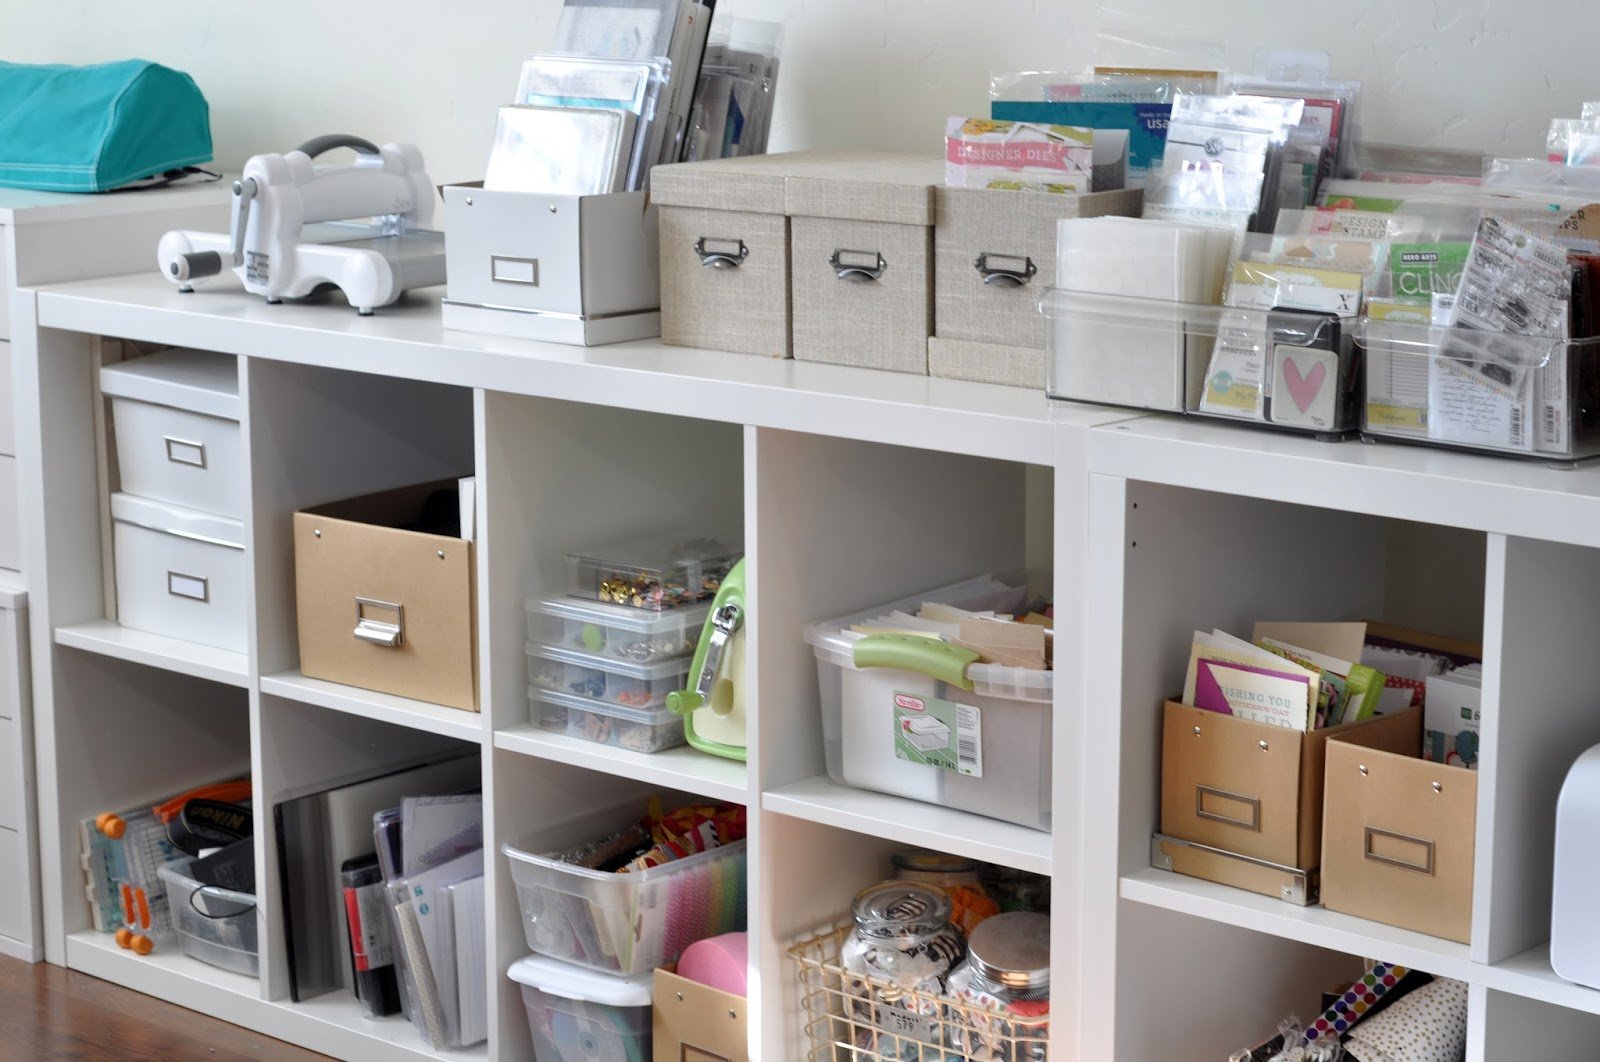 shelves with boxes filled with craft supplies